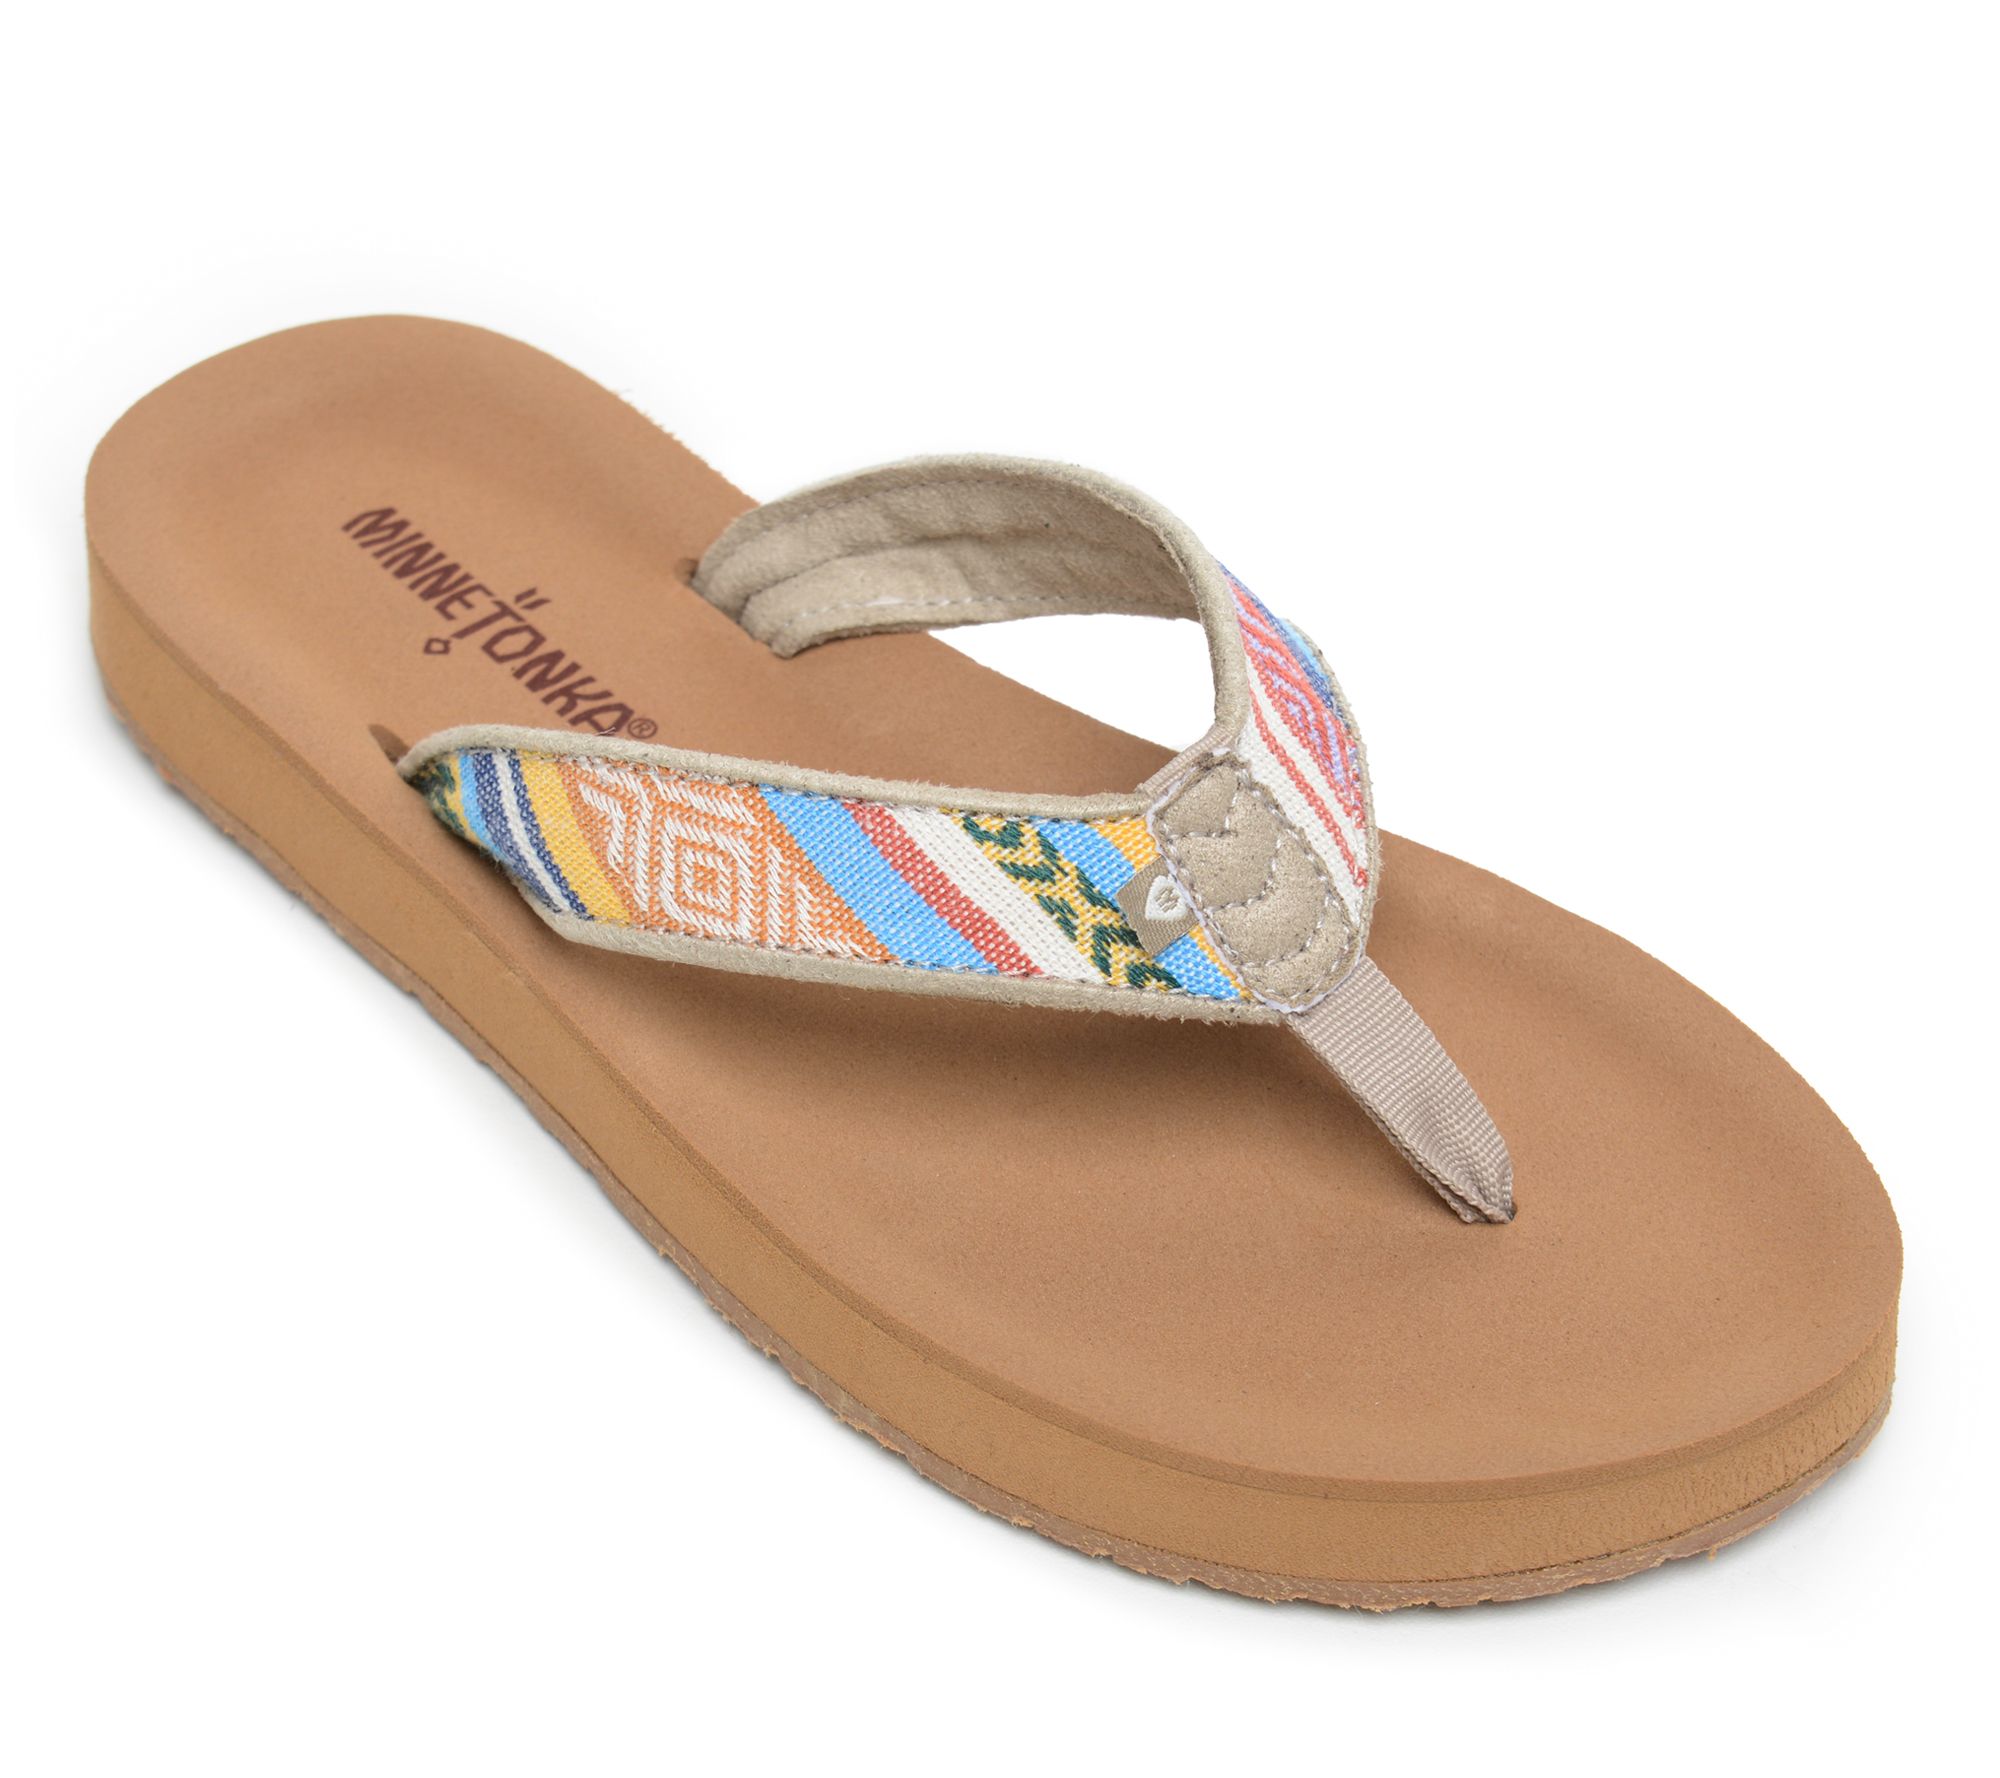 flip flops with material thong